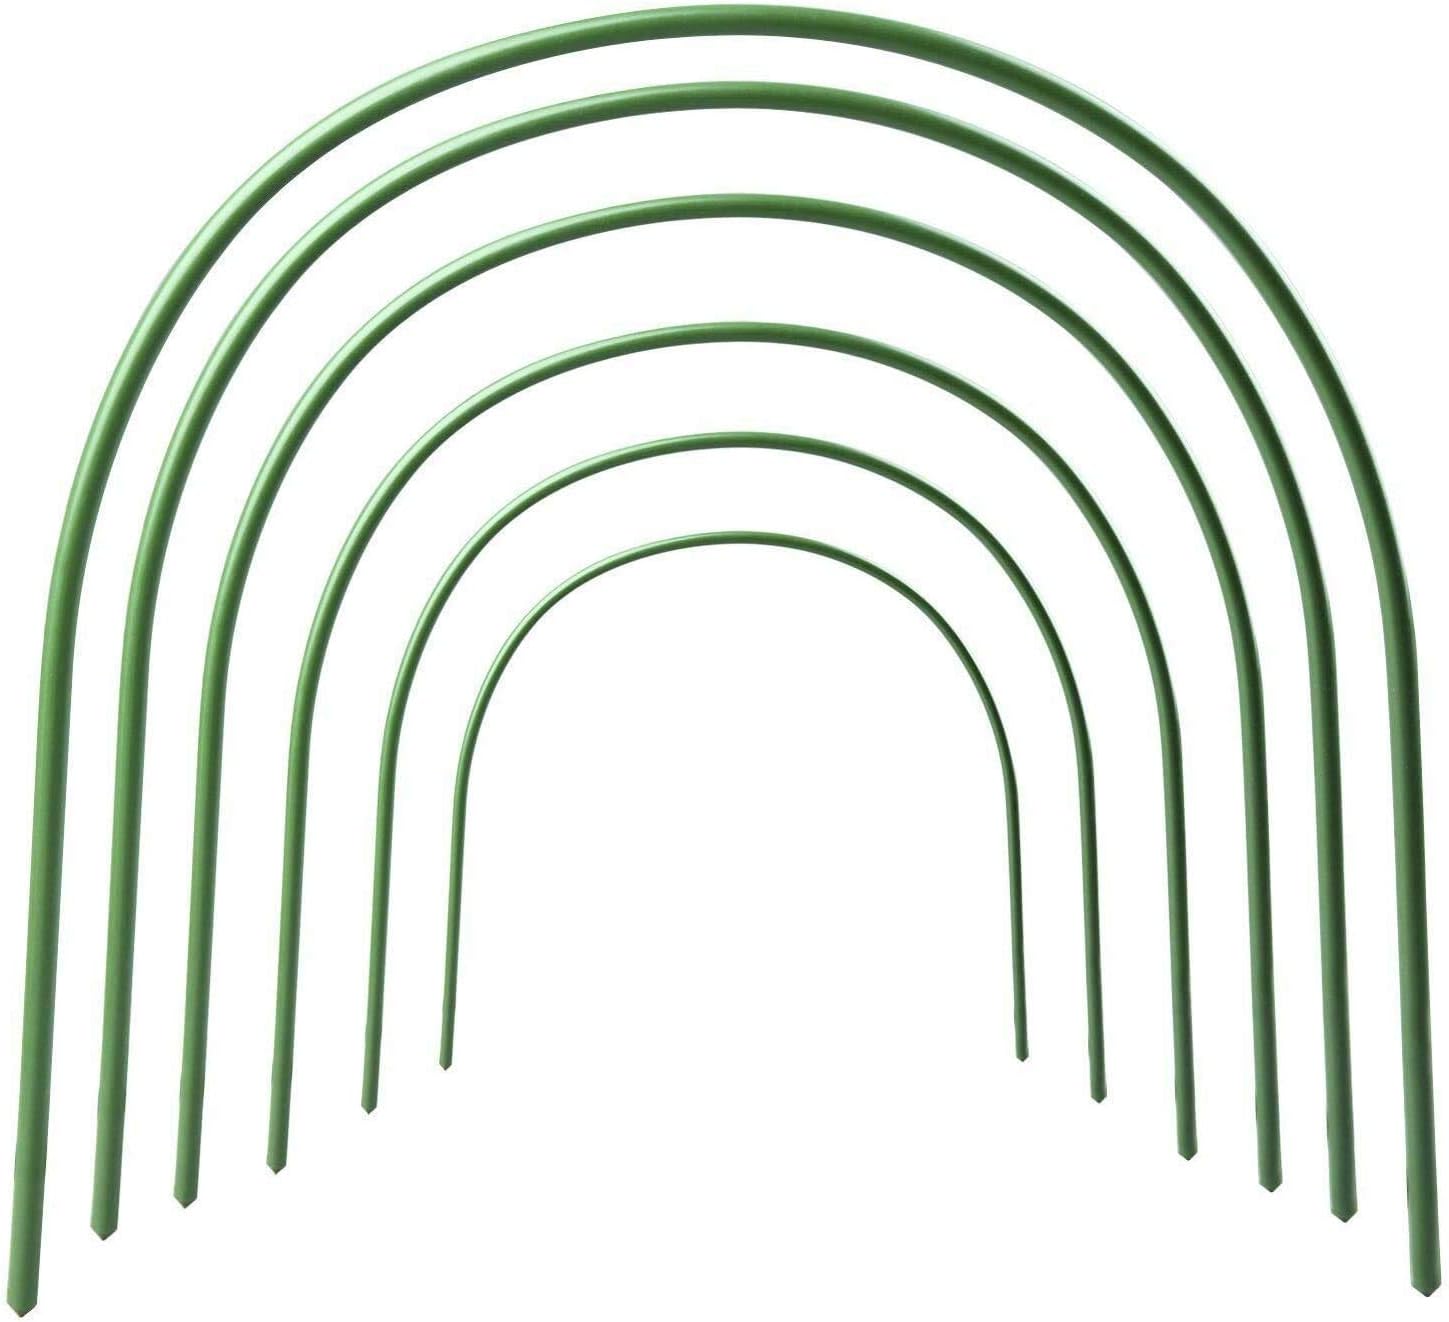 Plastic Coated Light Steel Bamboo Canes Plant Support 5ft x20